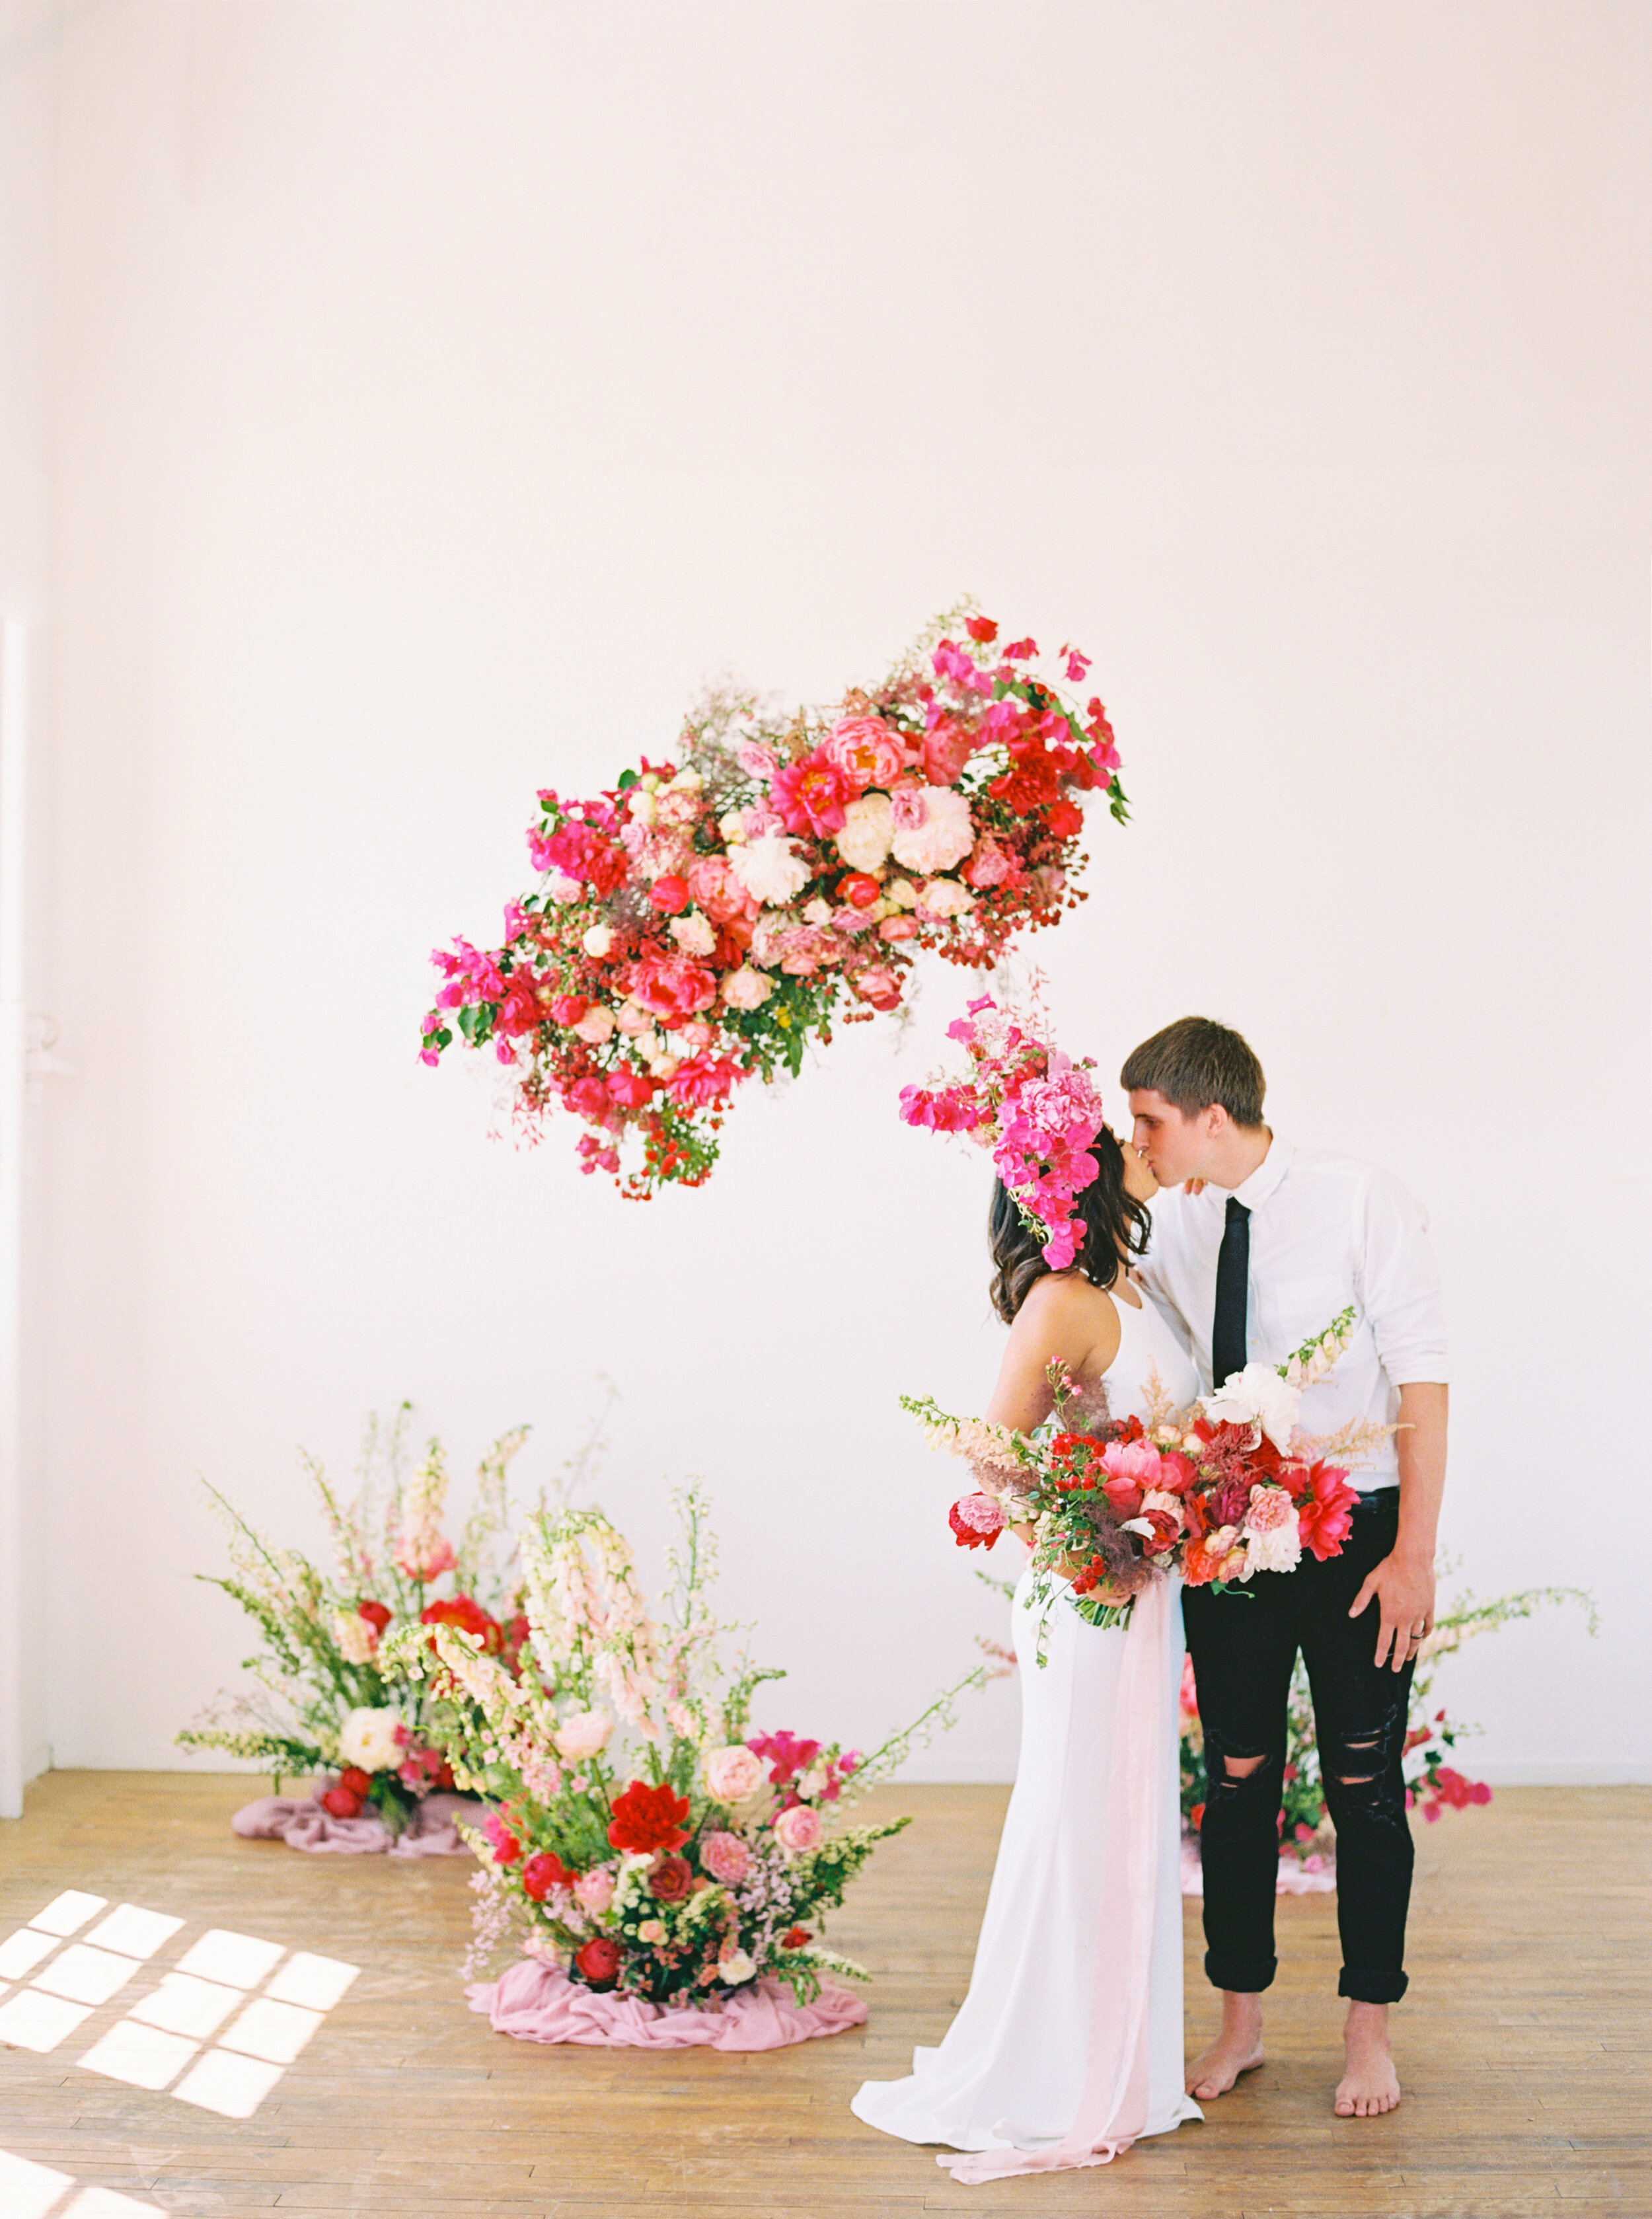 A Romantic Wedding Elopement Filled with Colorful Fuchsia - Sarahi Hadden Submission-31.jpg